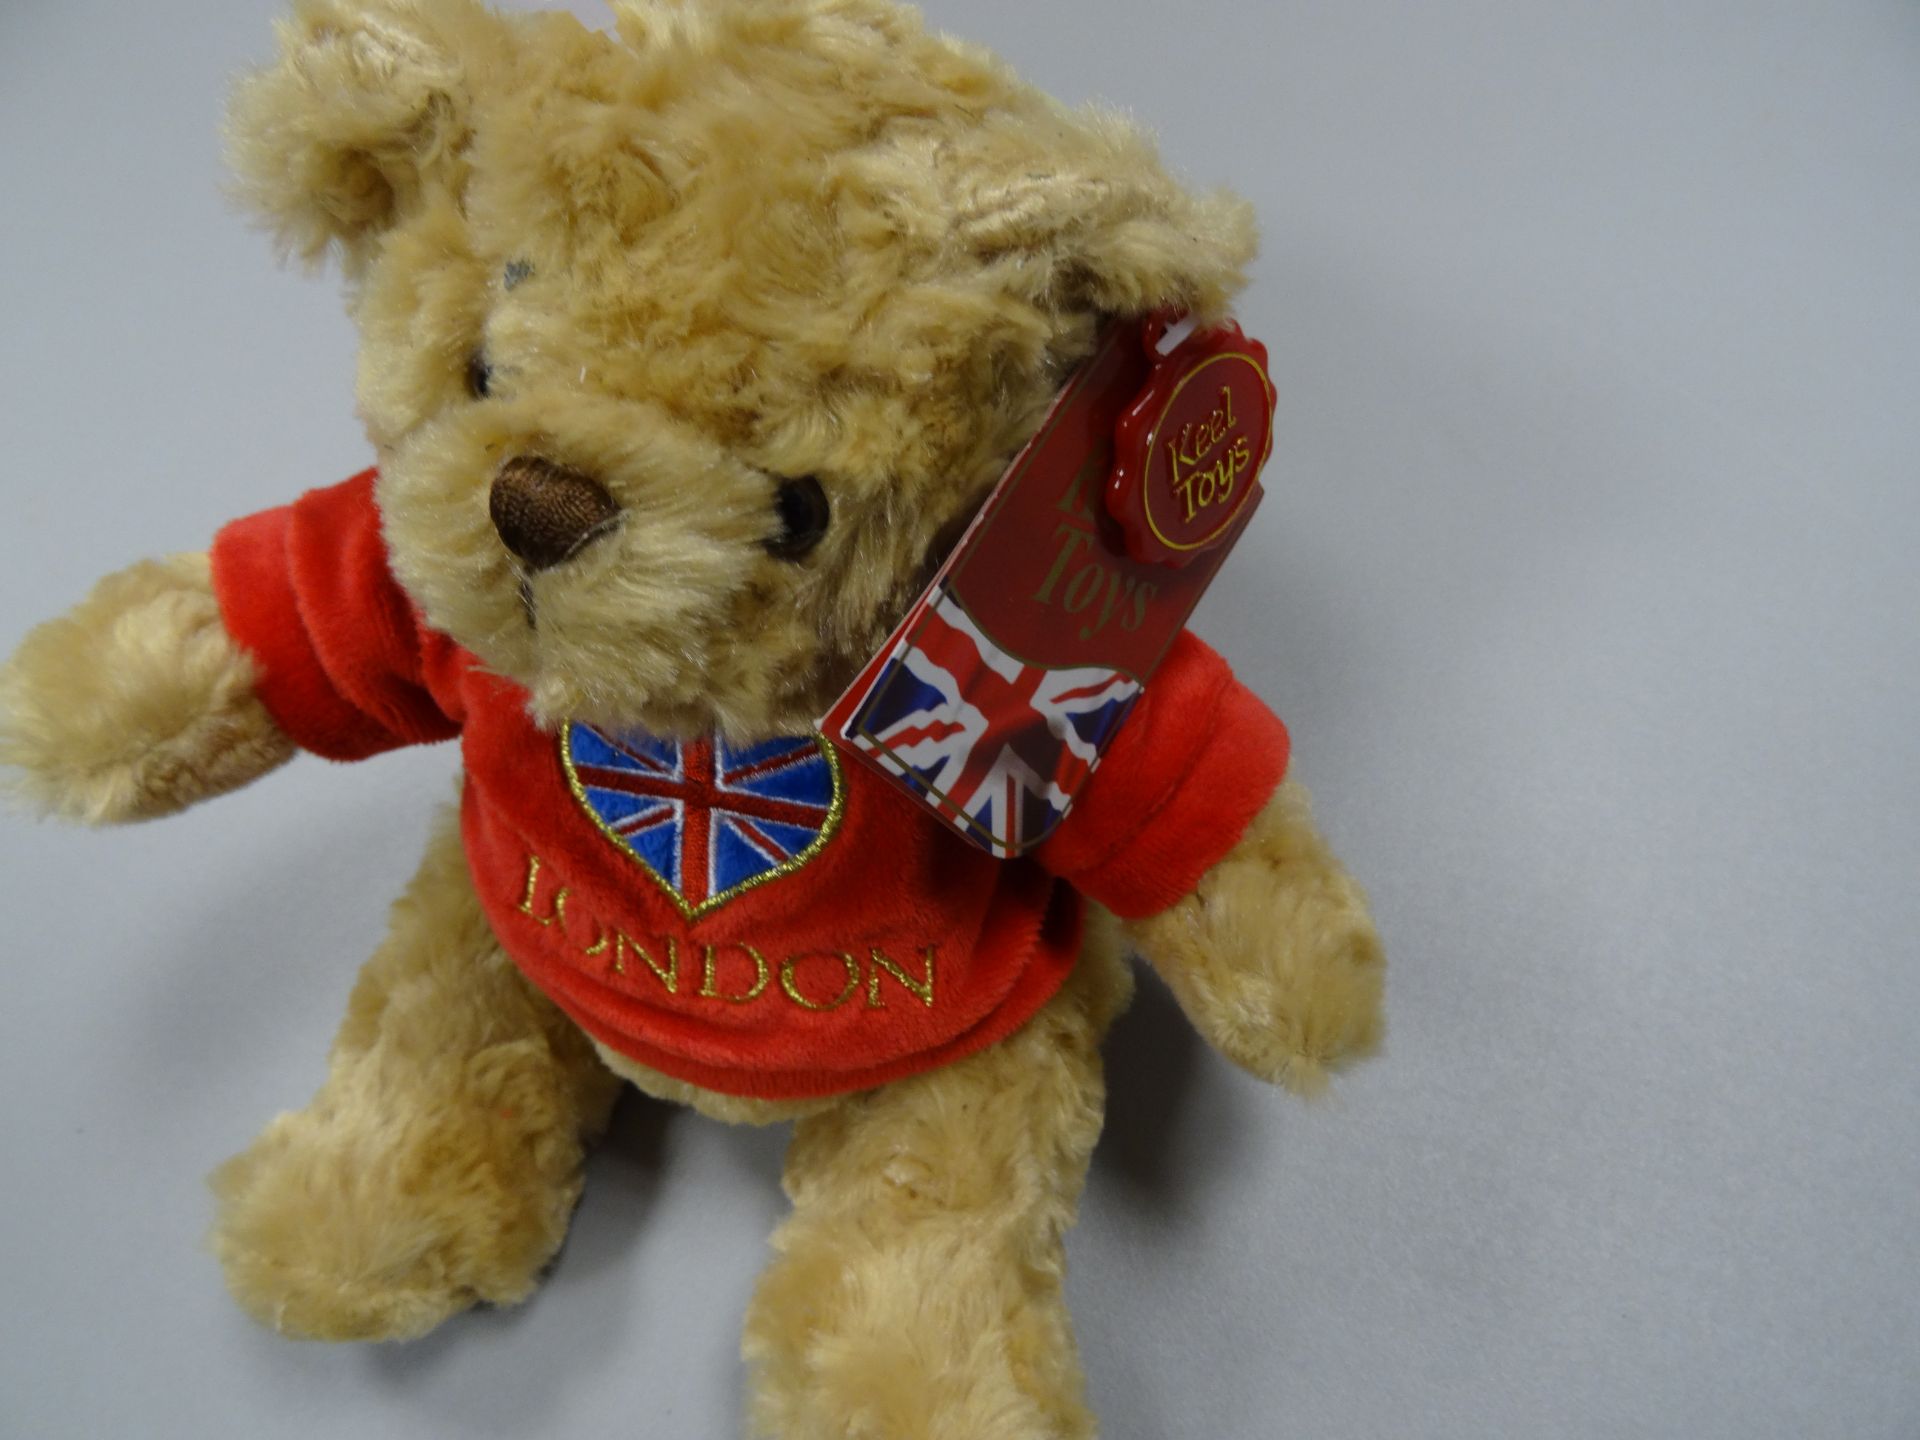 Keel Toys Teddy Bear Small Bear with I Love London Logo on Red Heart 15cm x 5 Units - Image 5 of 5